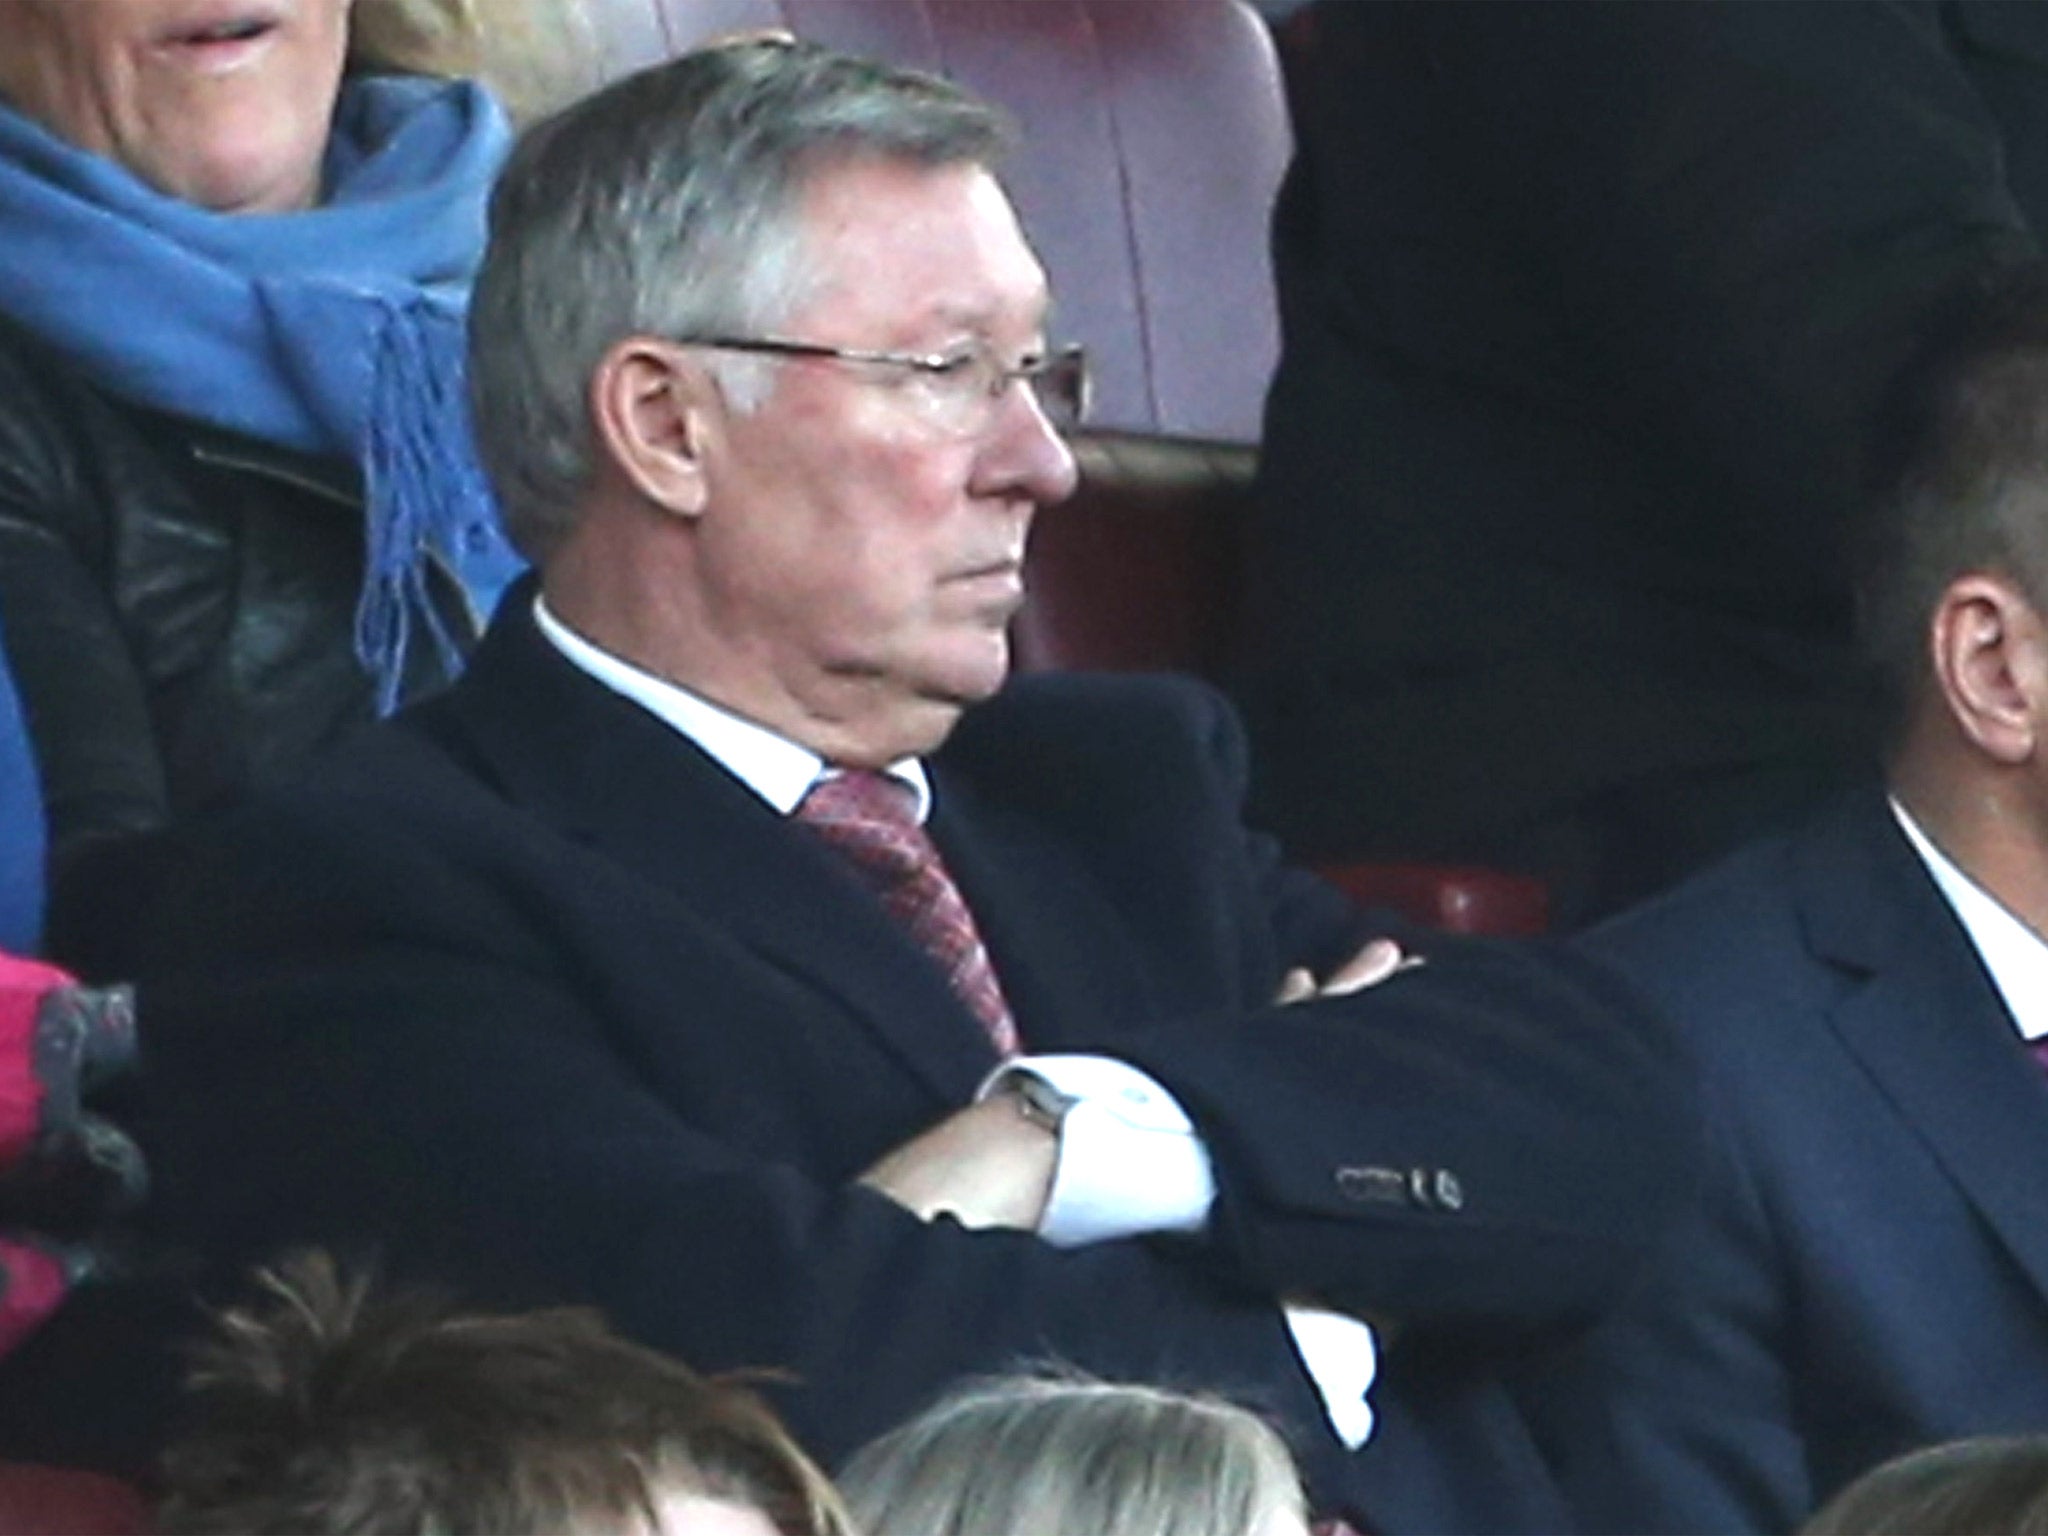 Sir Alex Ferguson’s presence at most United games has cast a shadow over David Moyes